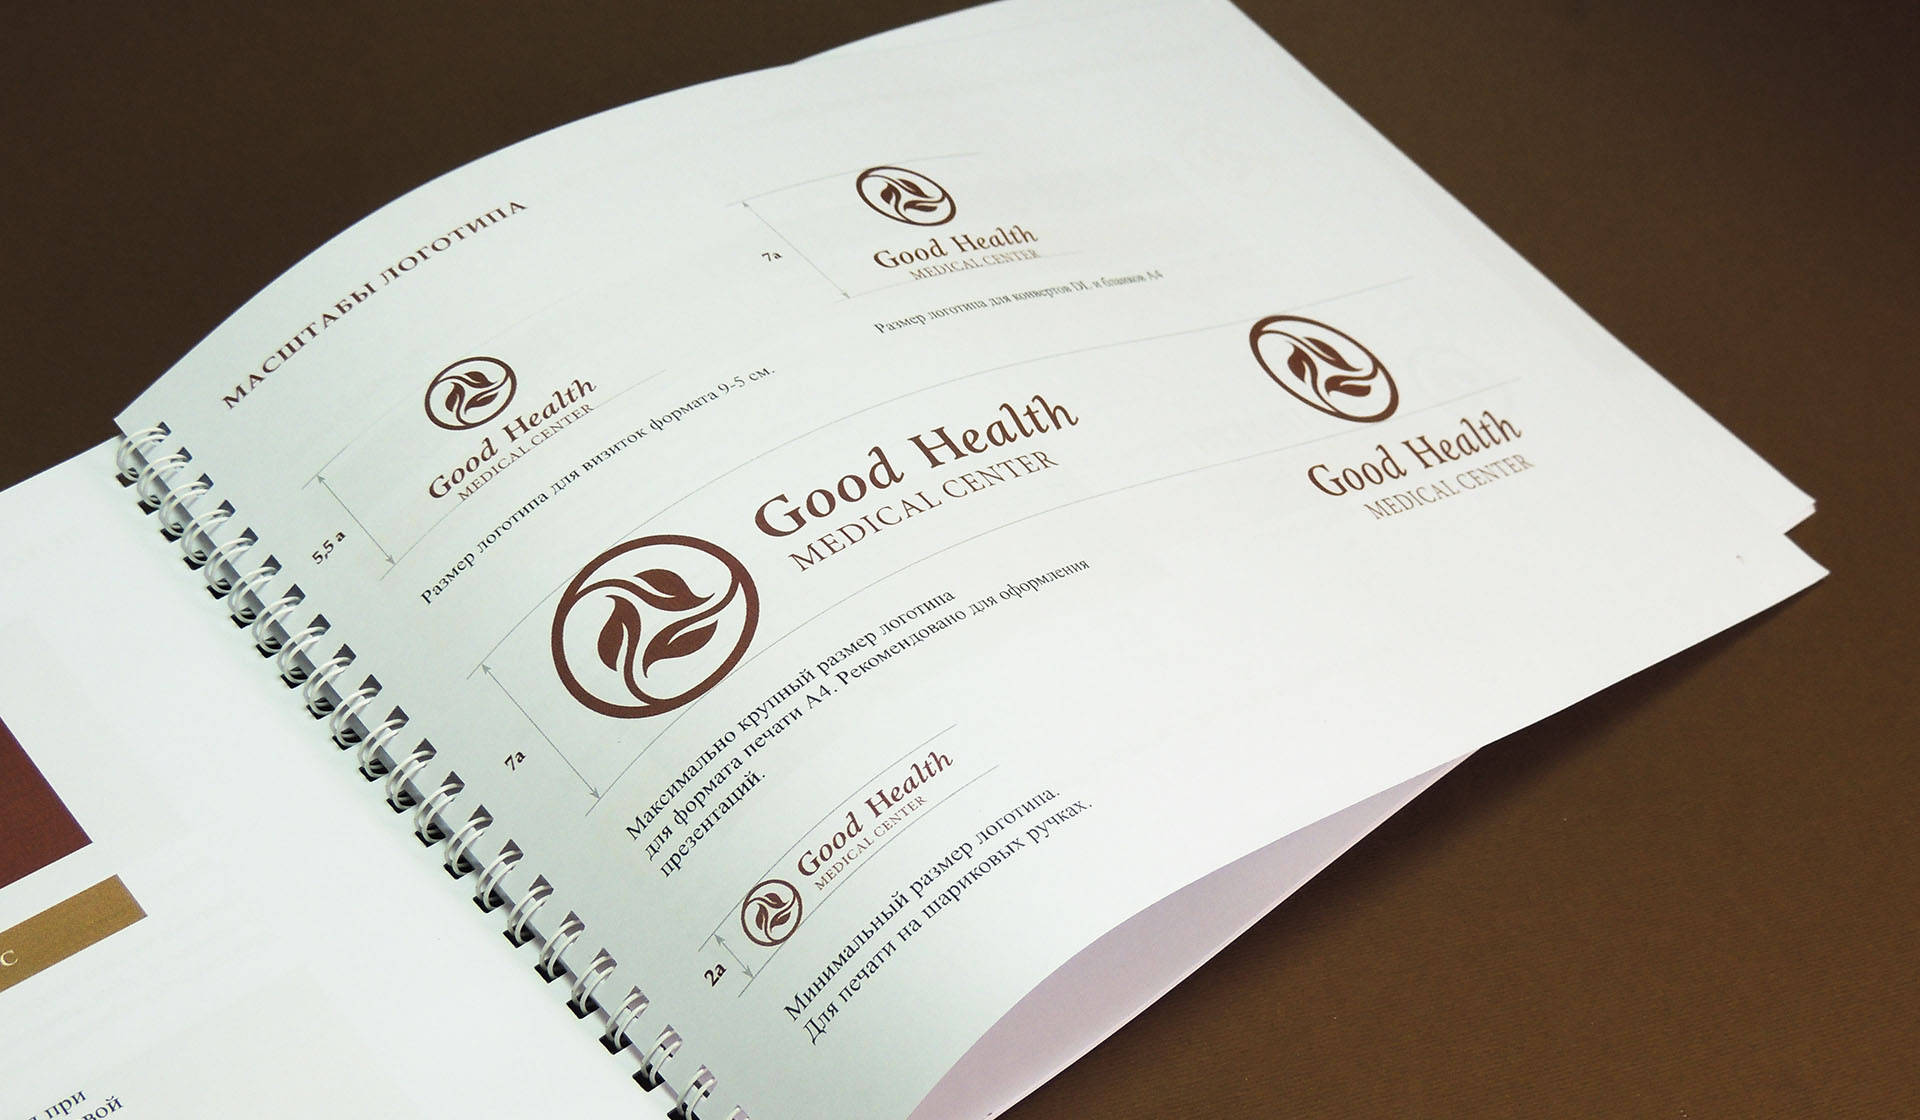 brand book of the medical clinic